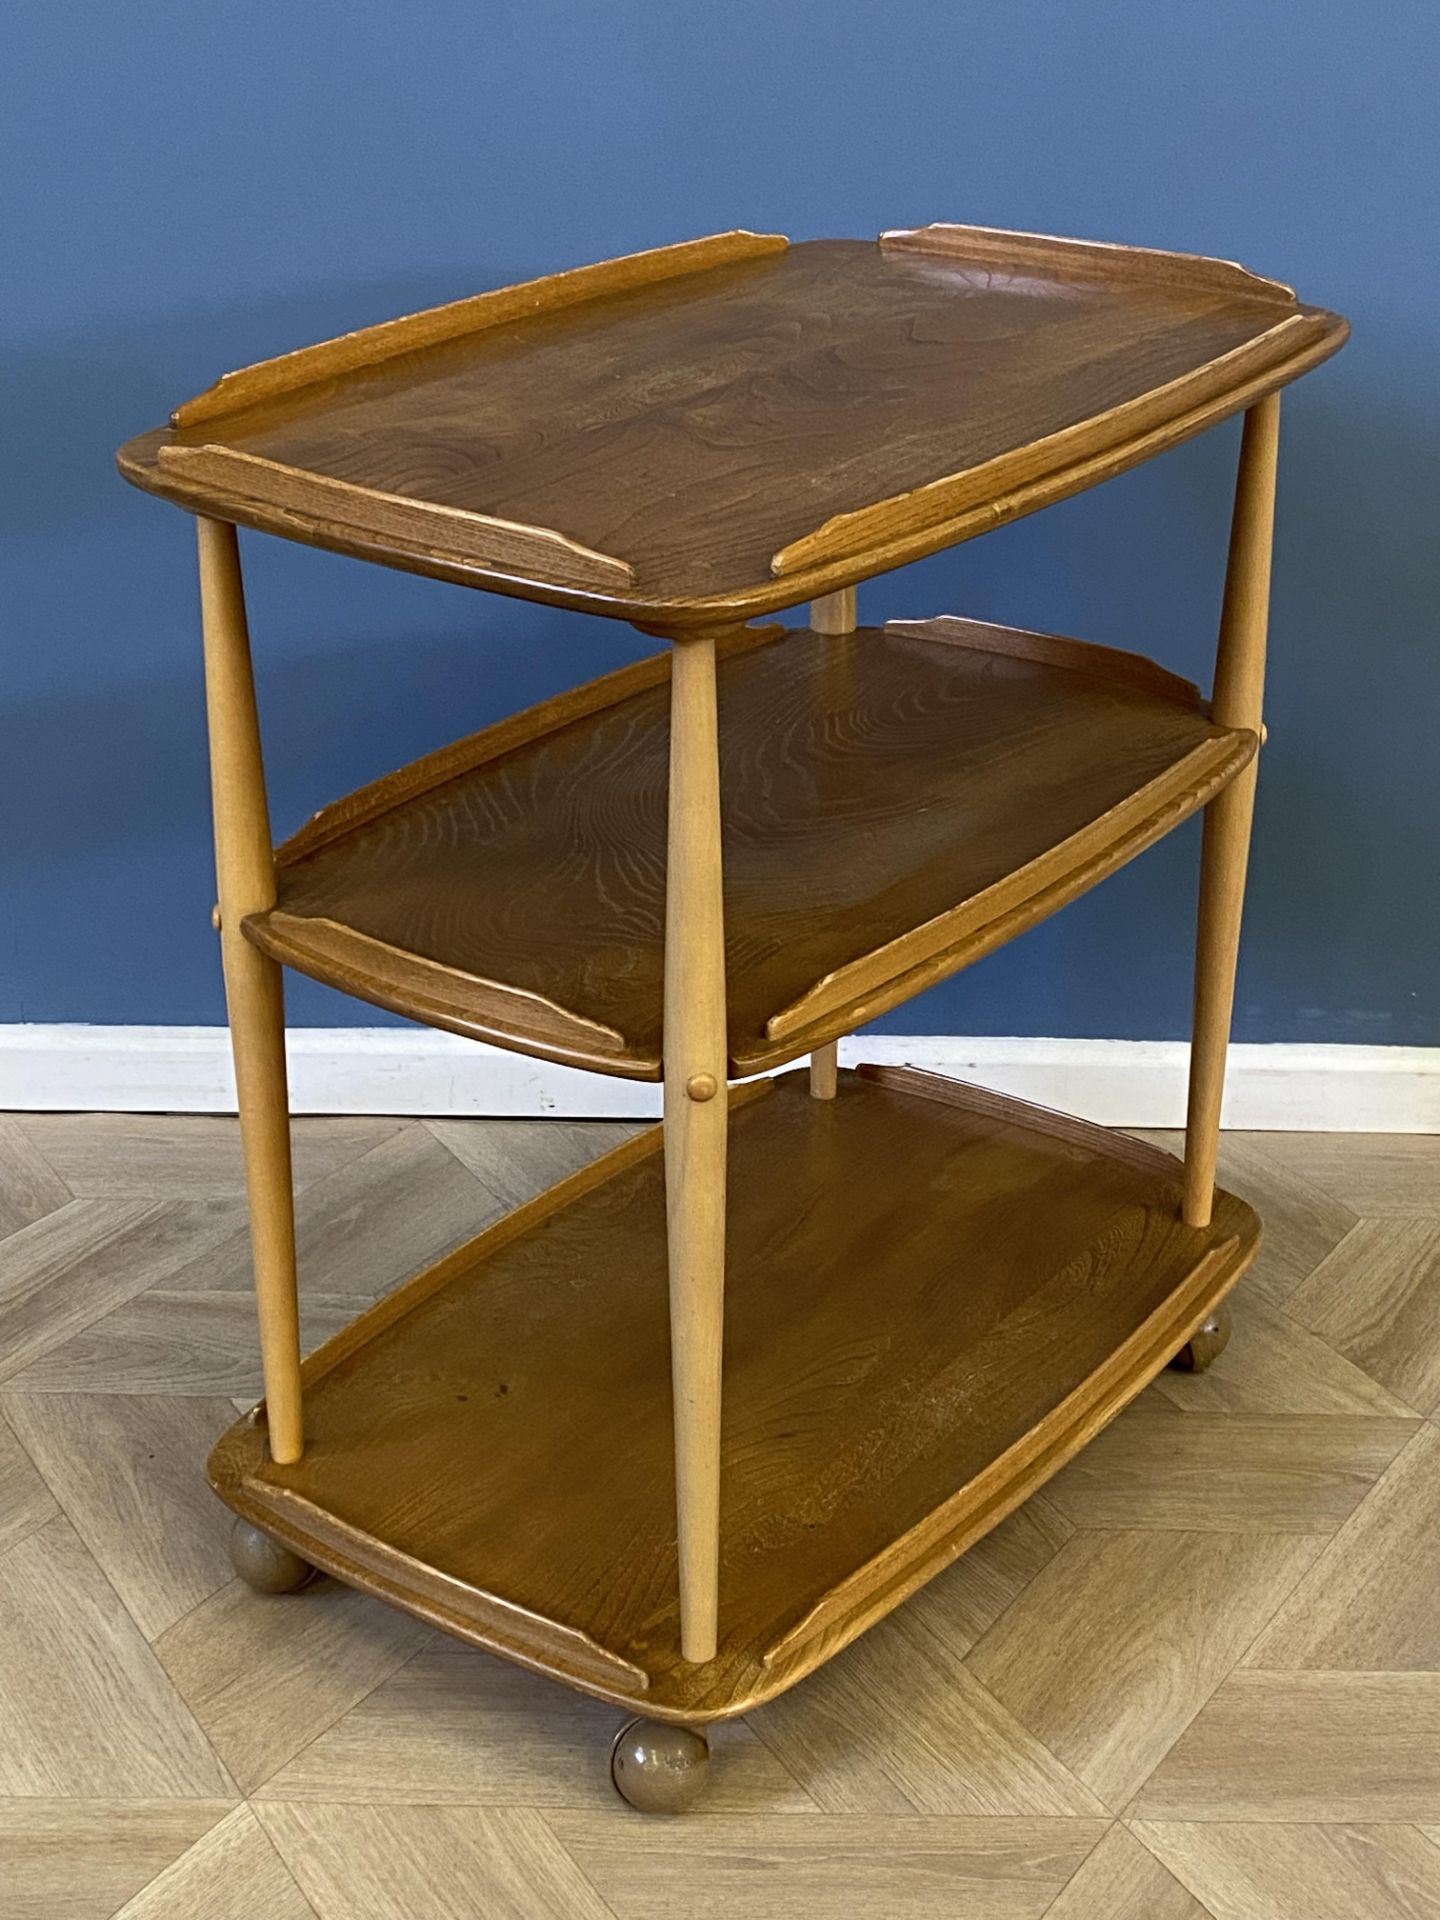 Ercol style three tier serving trolley - Image 2 of 5